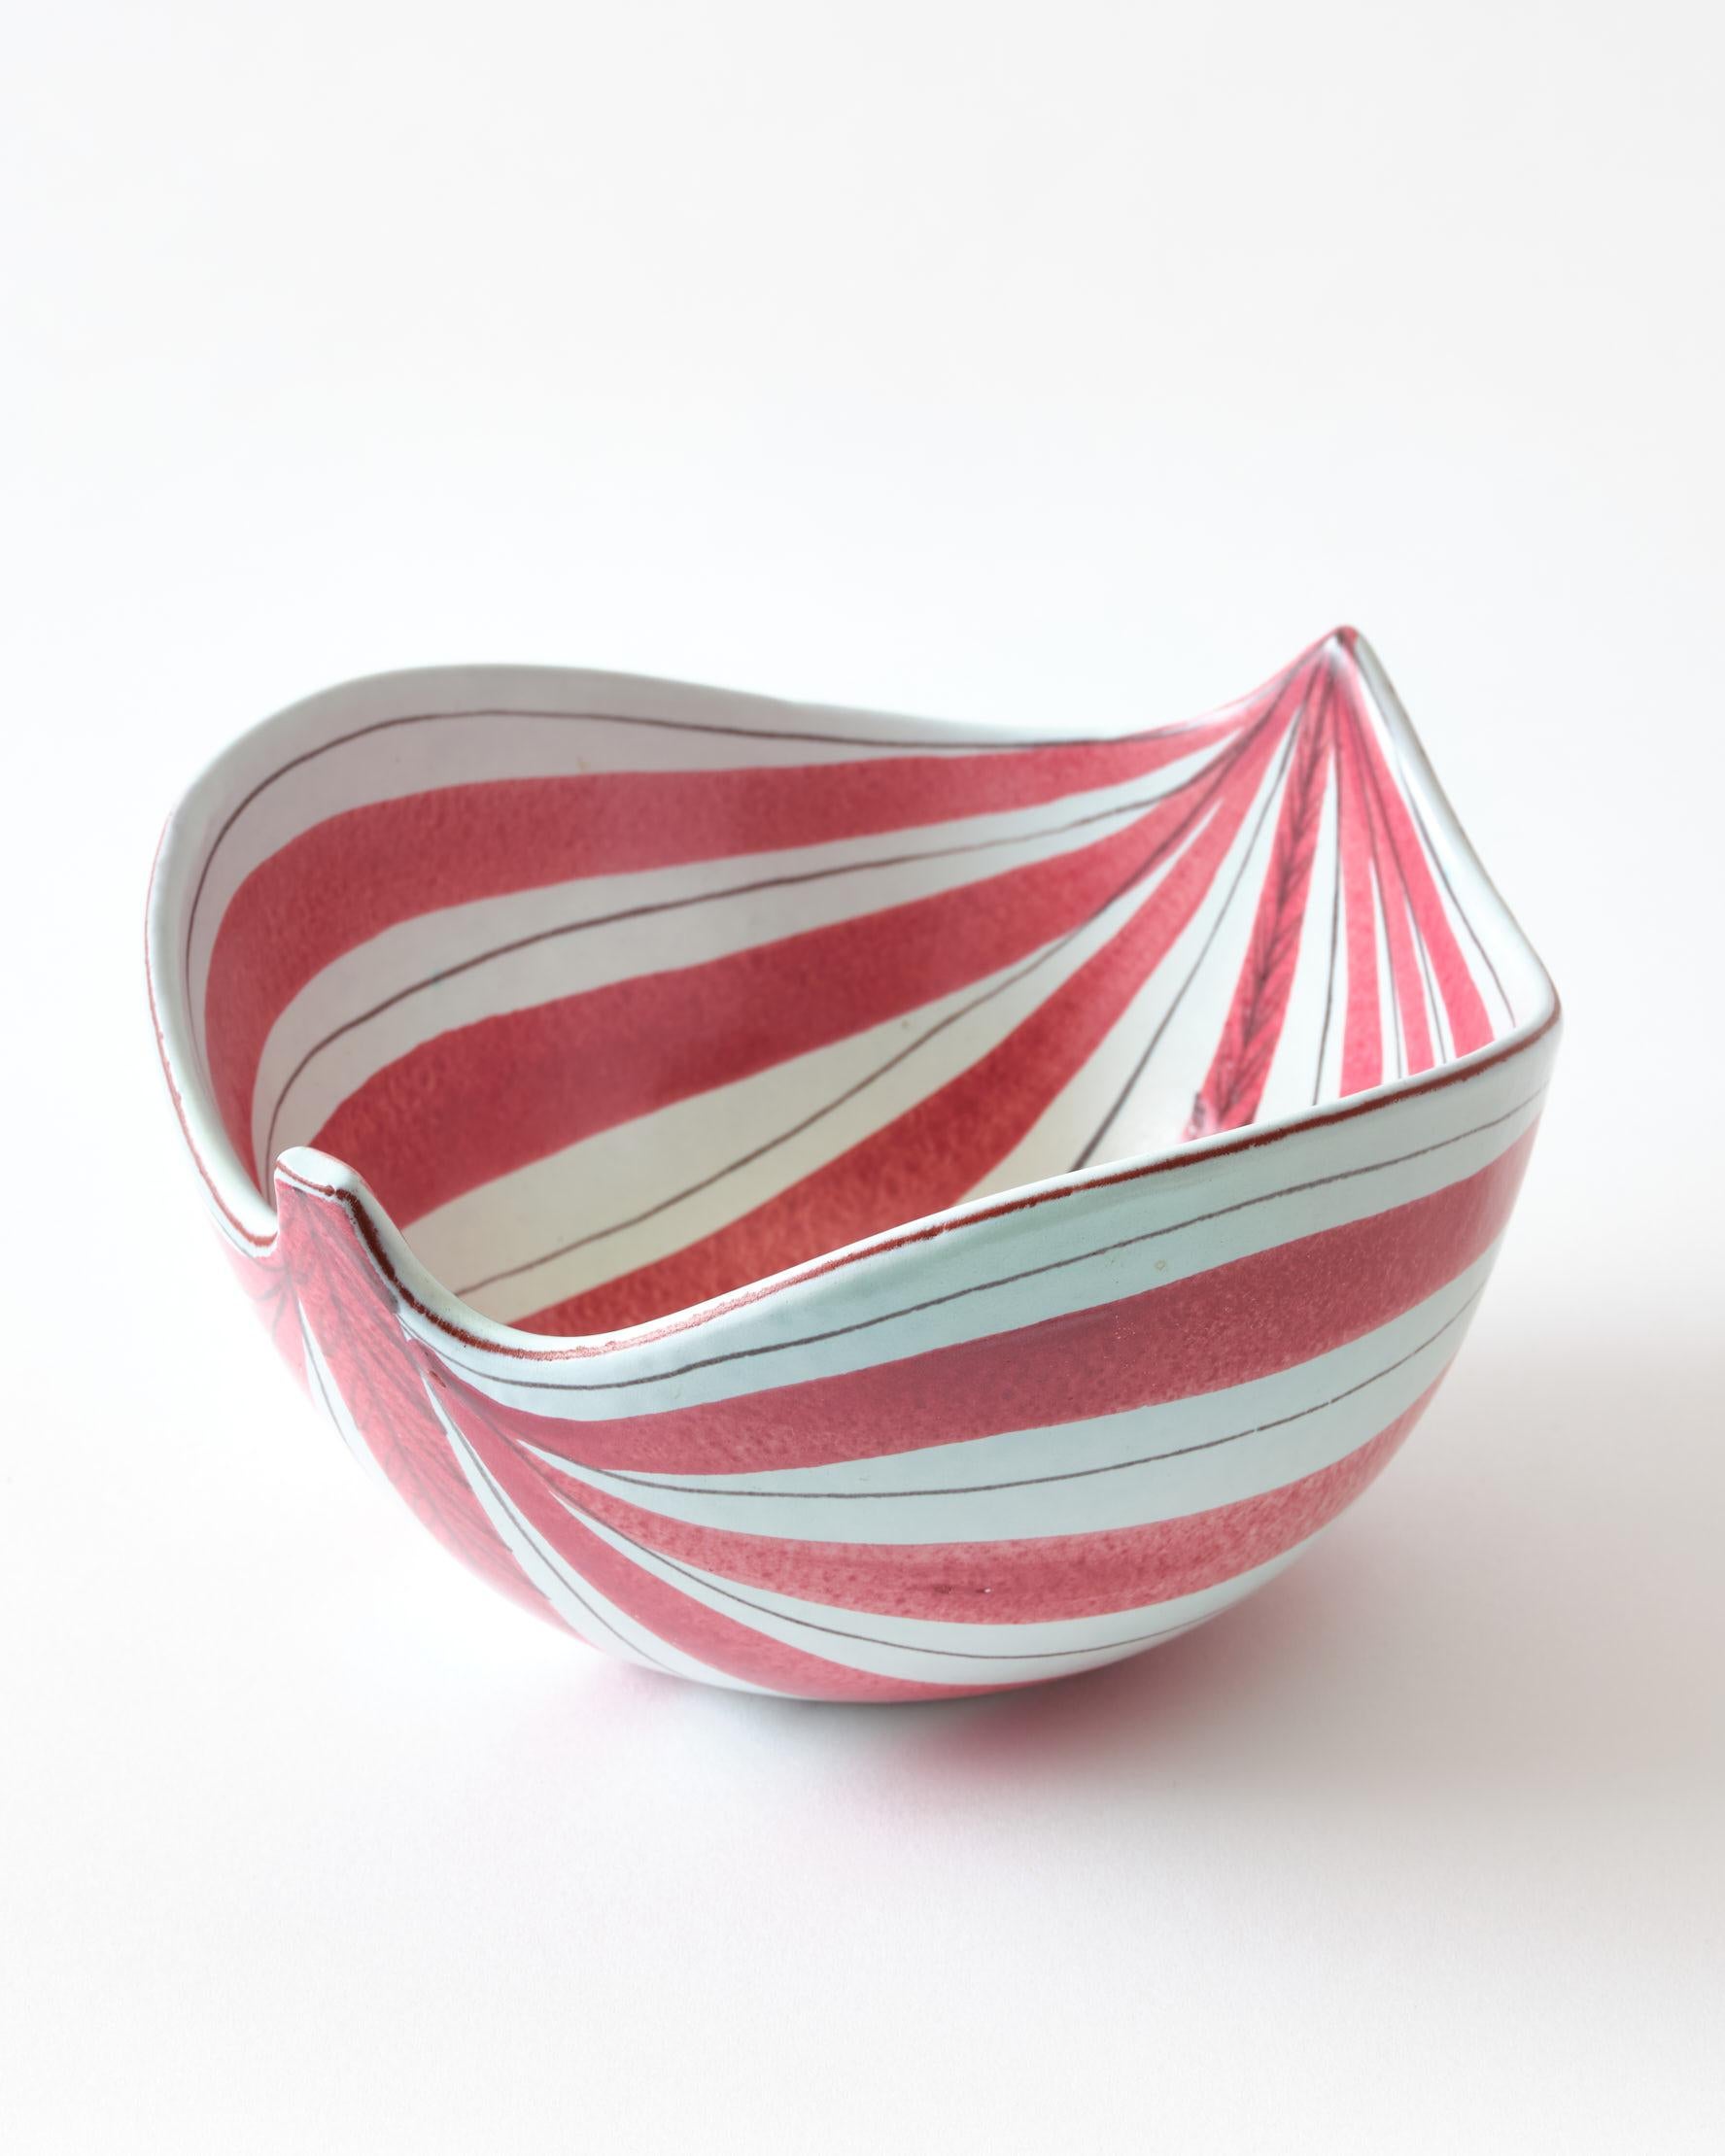 Mid-20th Century Ceramic Bowl by Stig Lindberg, Sweden, C 1950, Red & White Striped, Signed For Sale